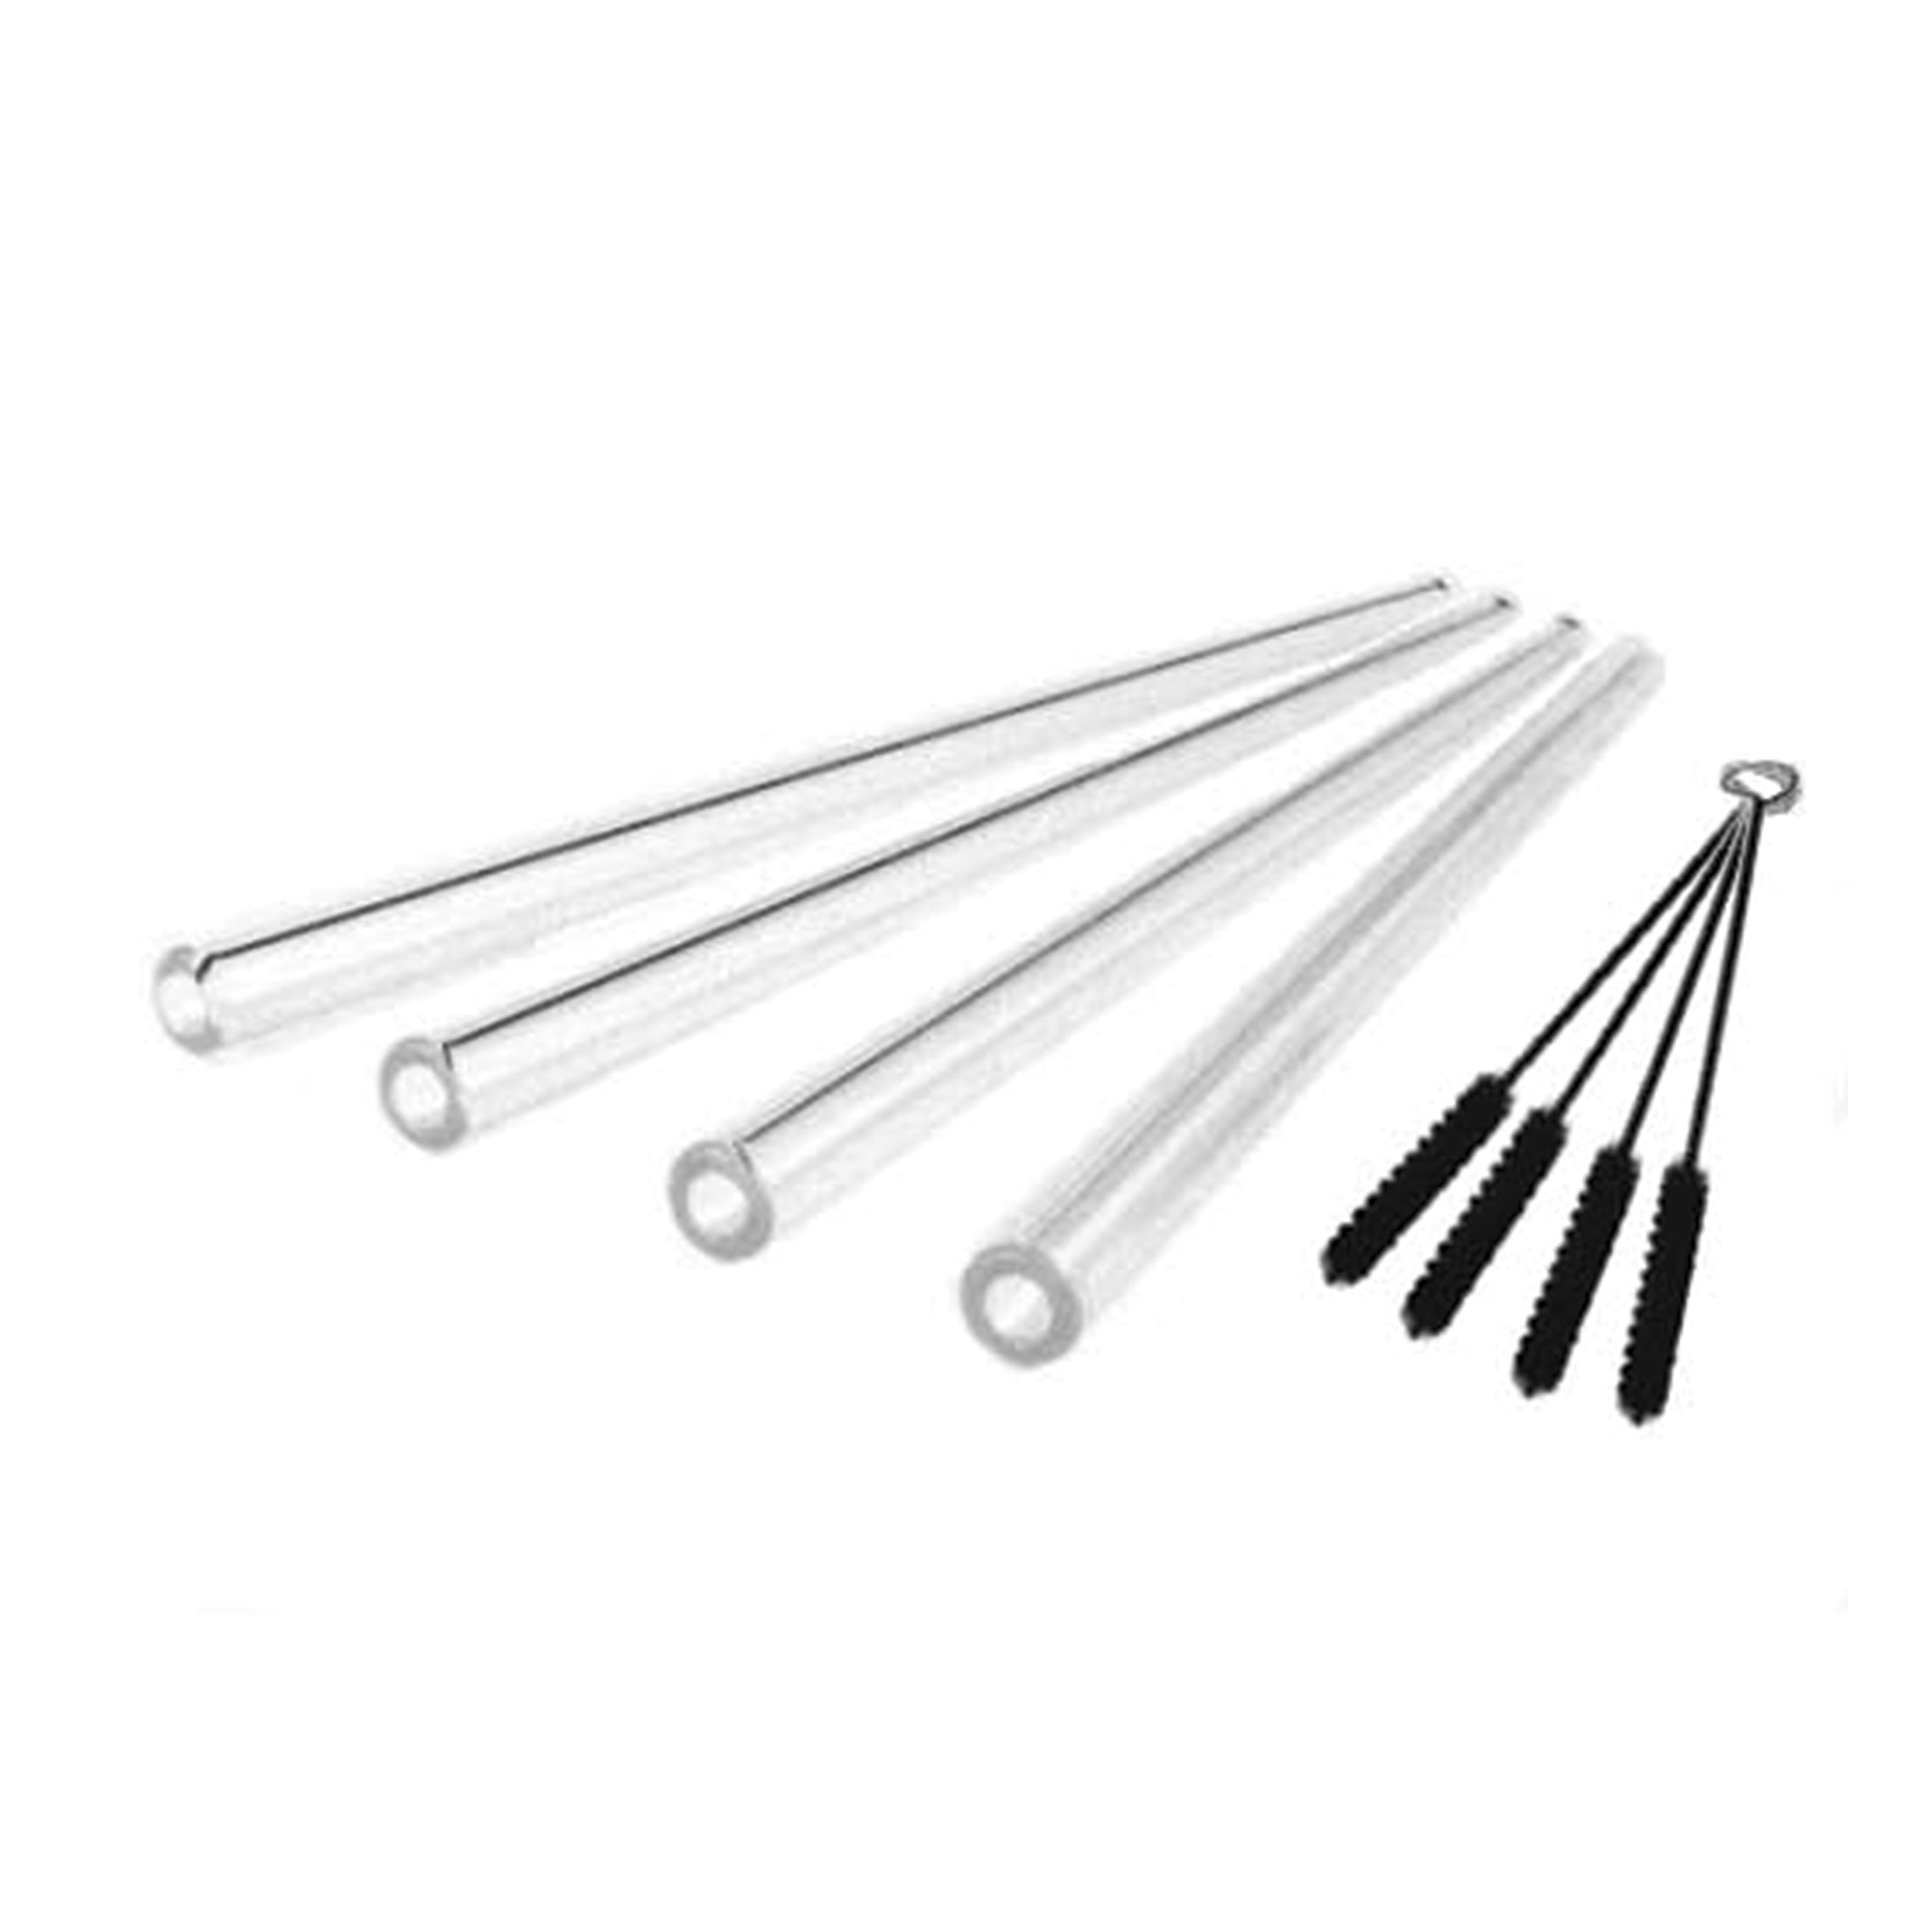 8 Pieces 14 Inch Stainless Steel Straws Long Drinking Straws for 100 oz  Tumblers, Reusable Metal Drinking Straws Extra with 4 Pieces Cleaning Brush  